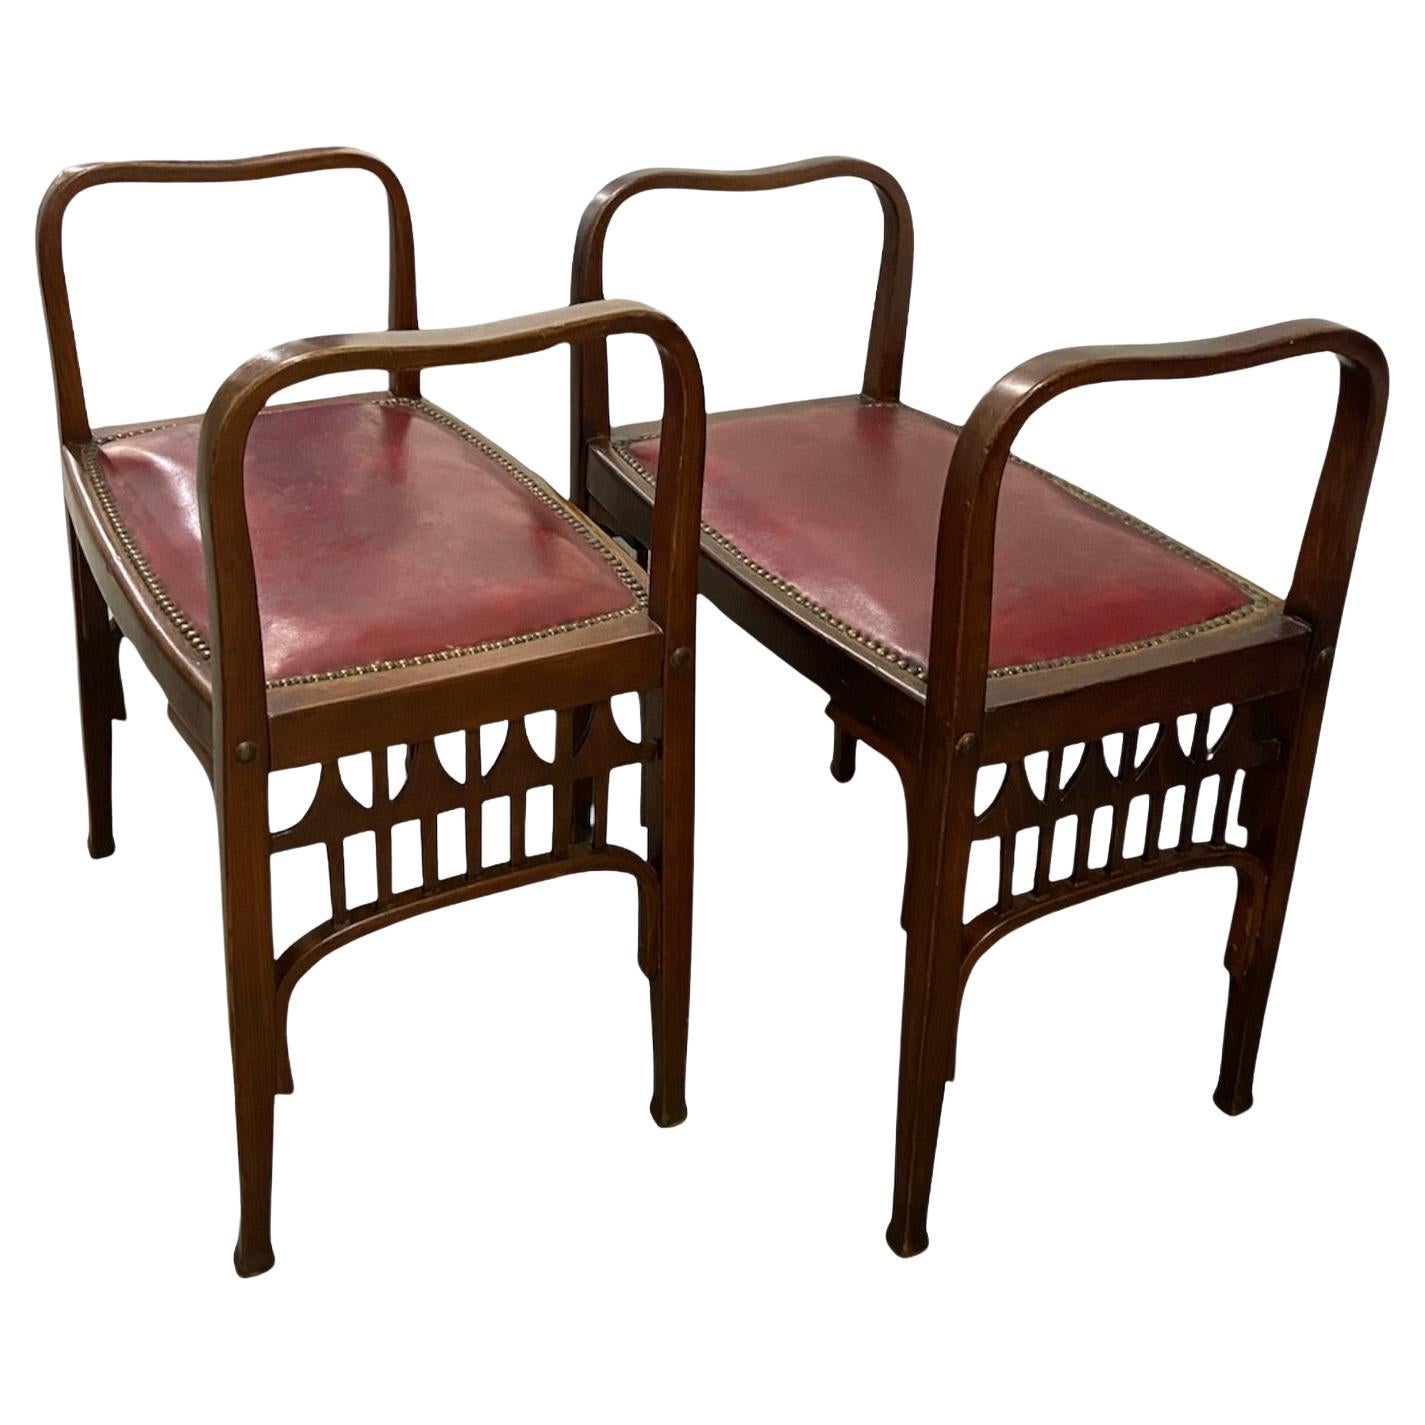 Pair of Austrian Secessionist Bentwood Stools, Benches or Causeuses, early 20thC For Sale